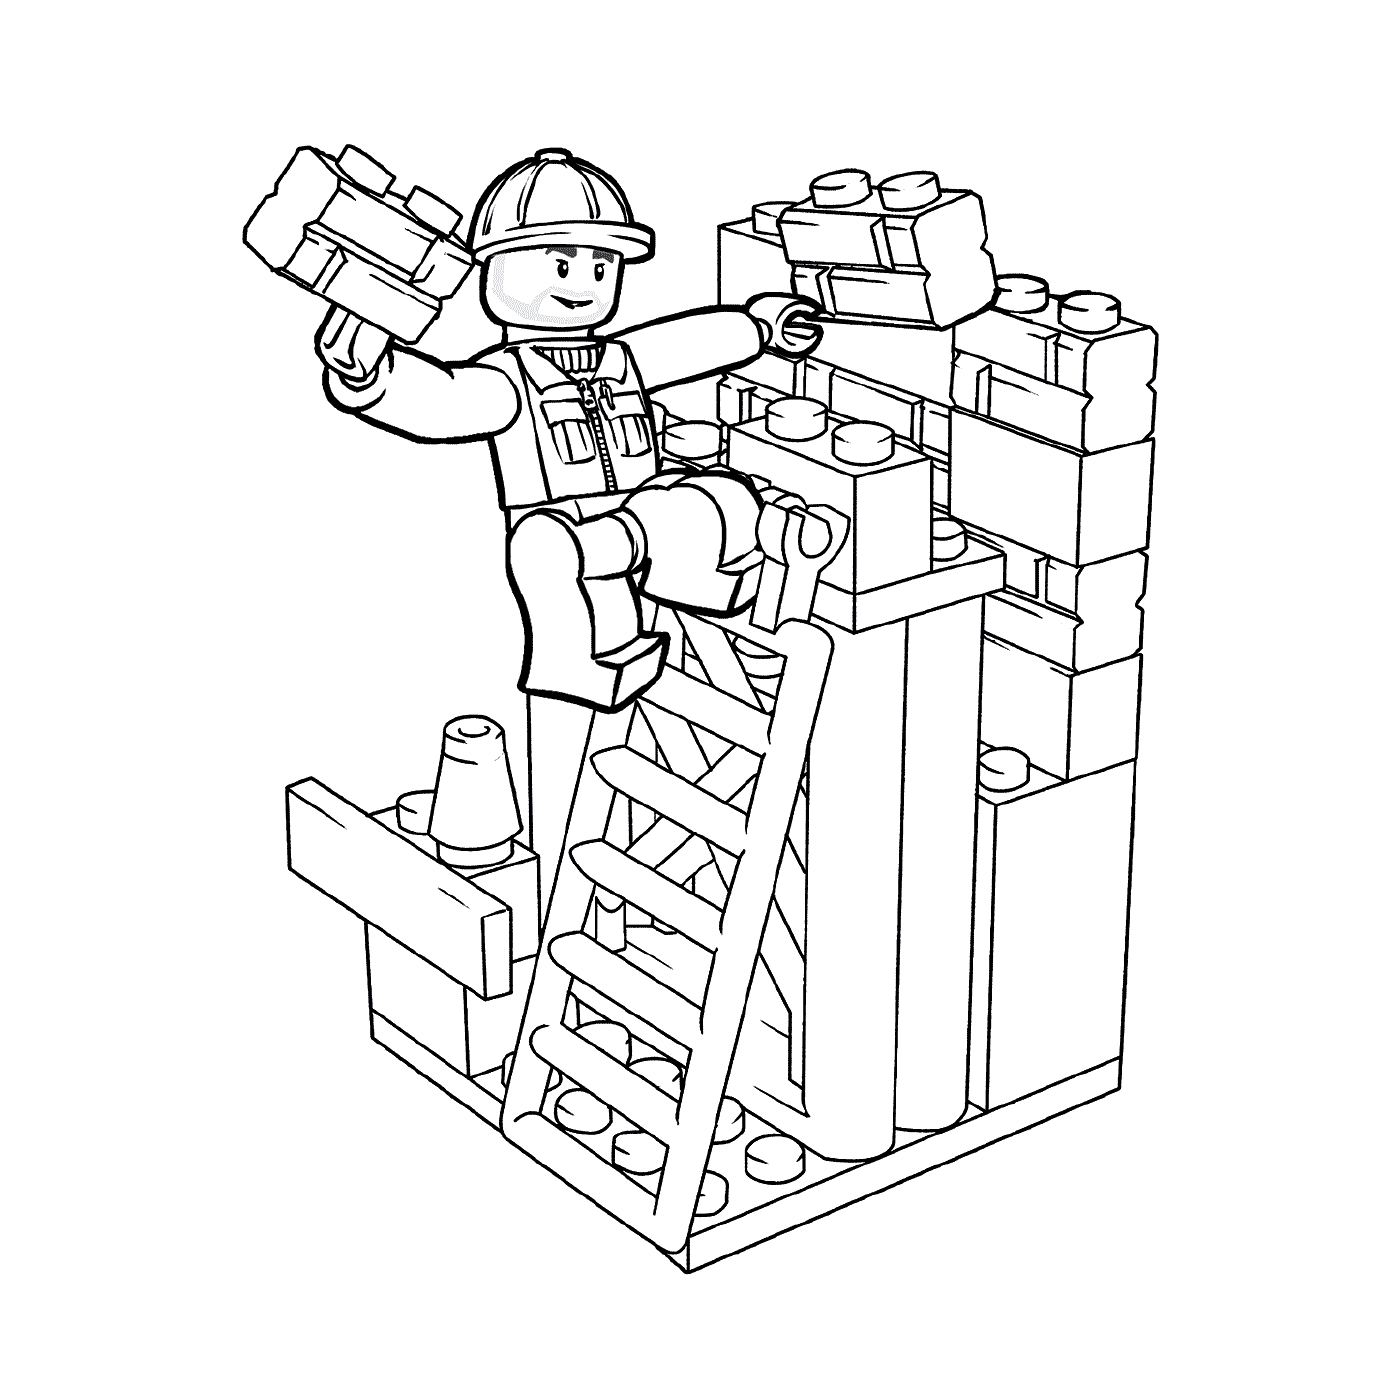  Worker of the LEGO building 